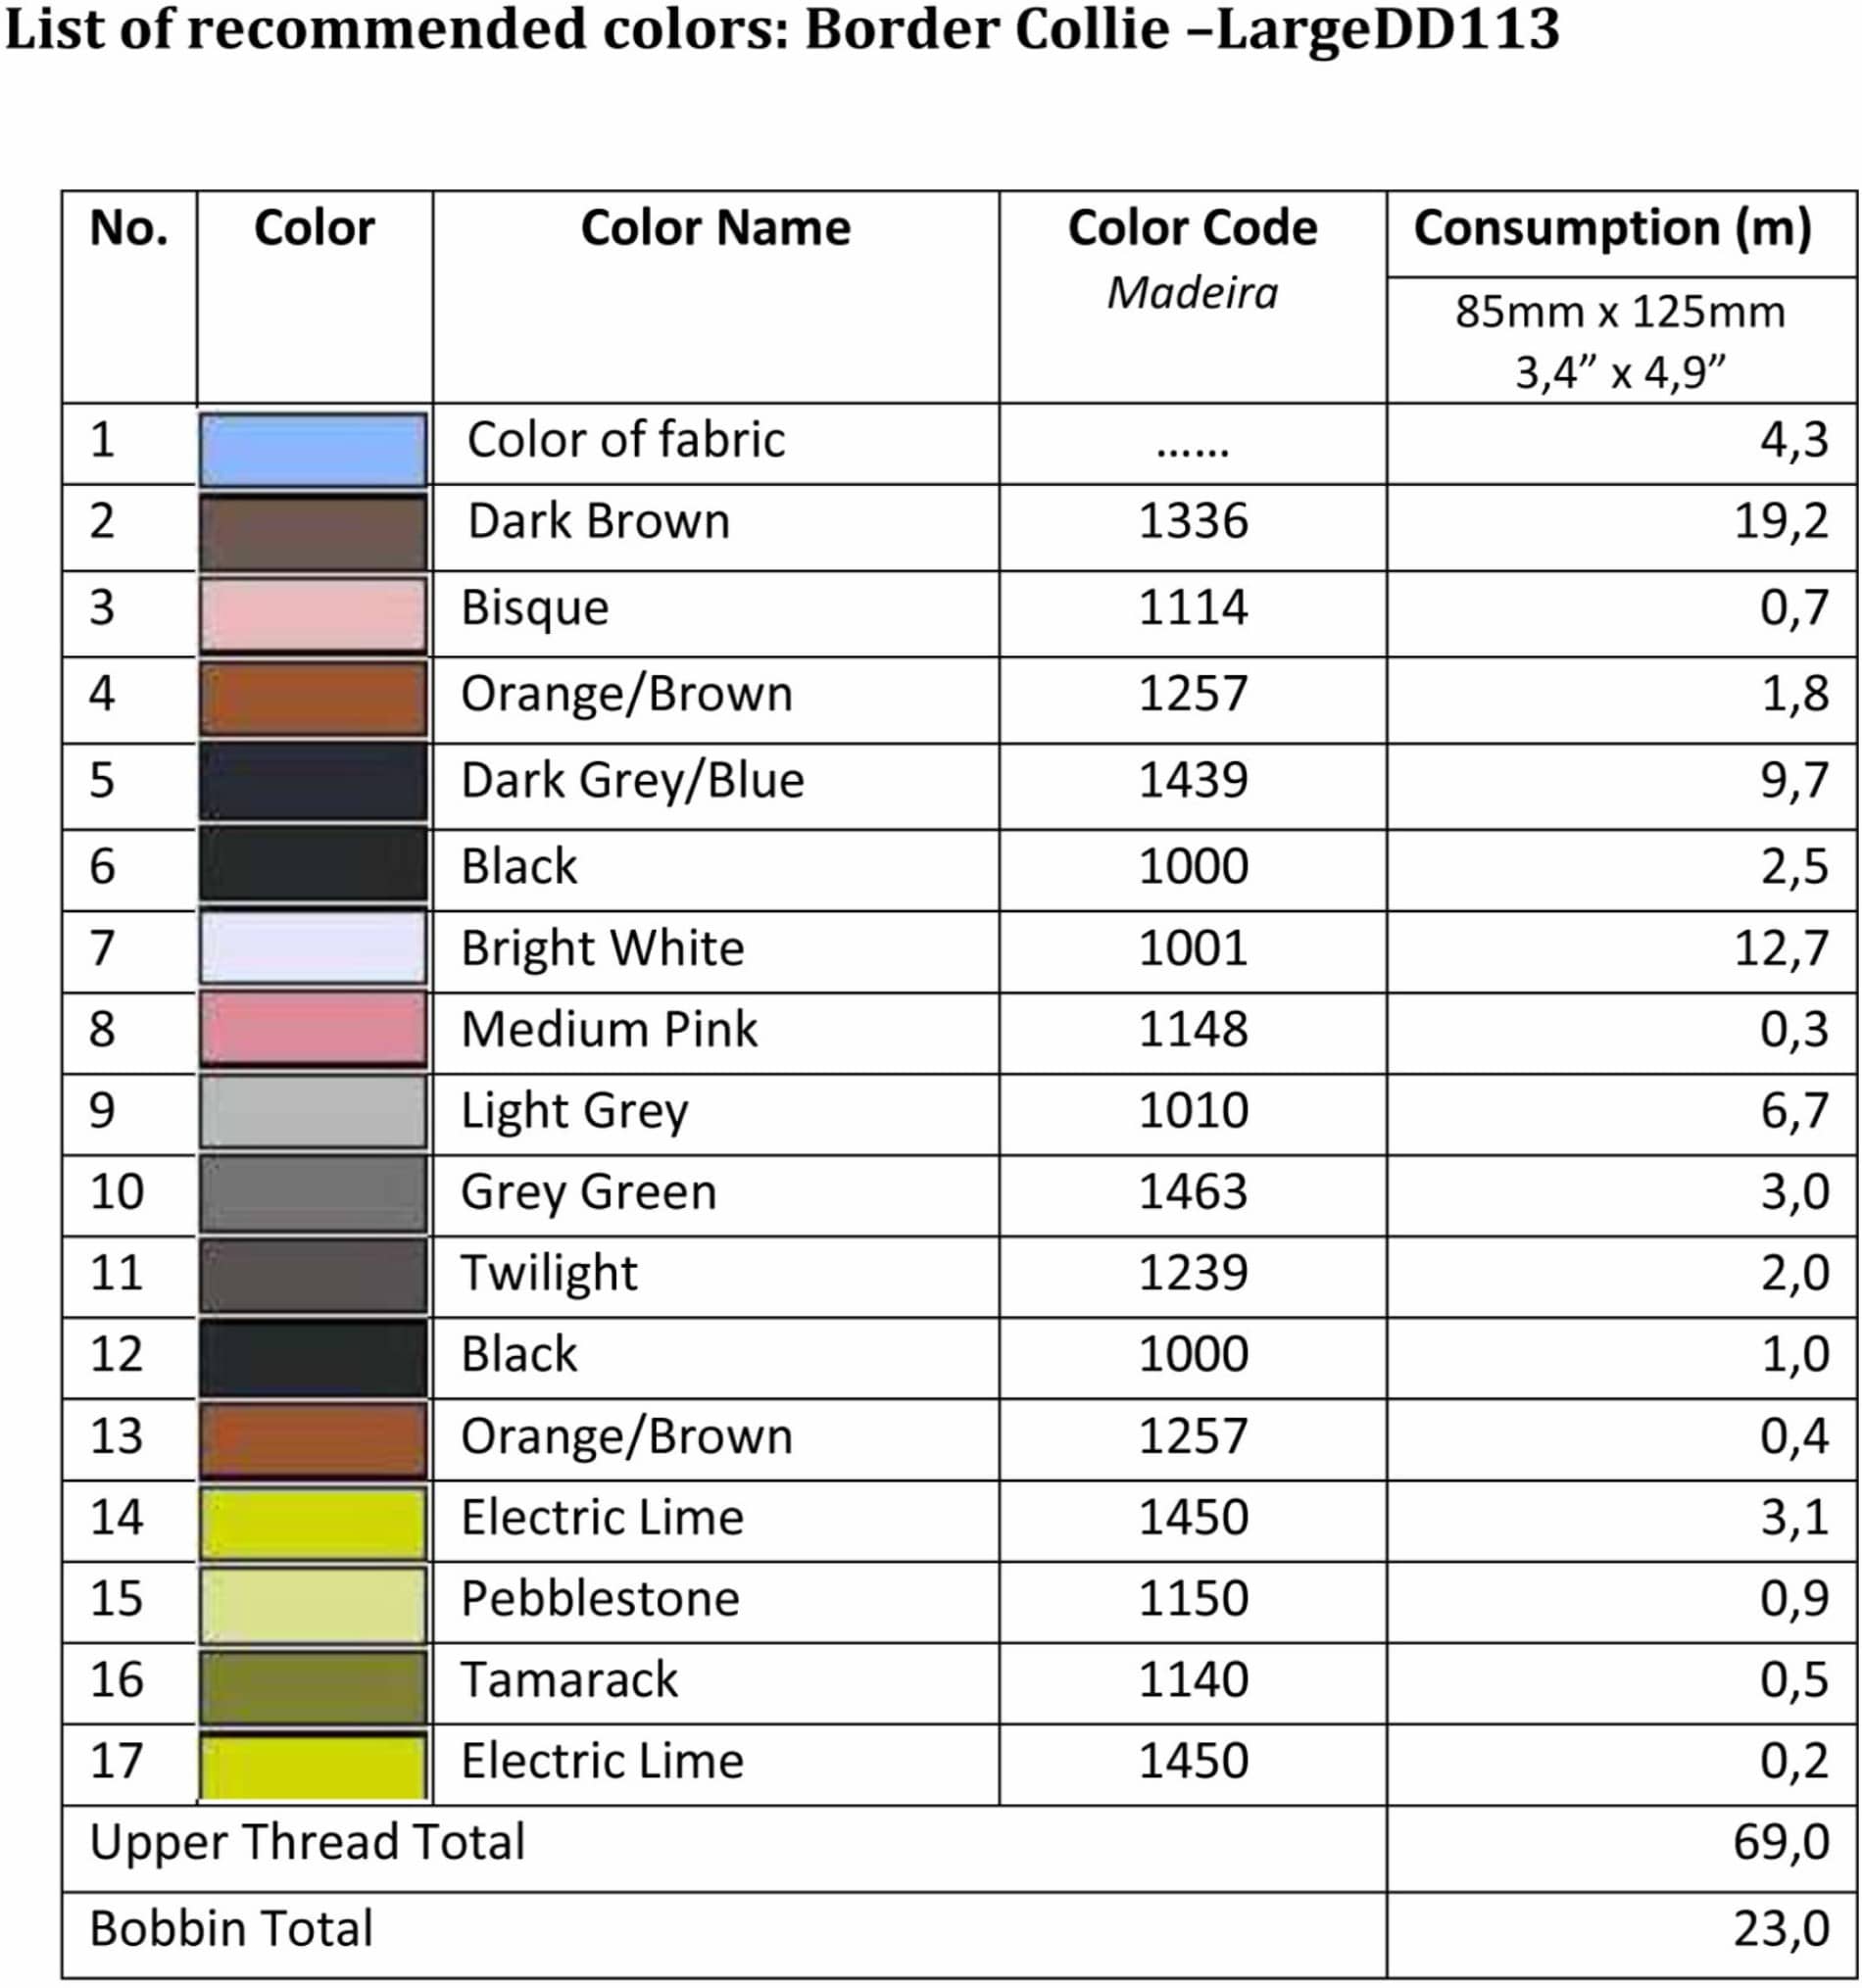 List of Recommended Colors - Border Collie LargeDD113